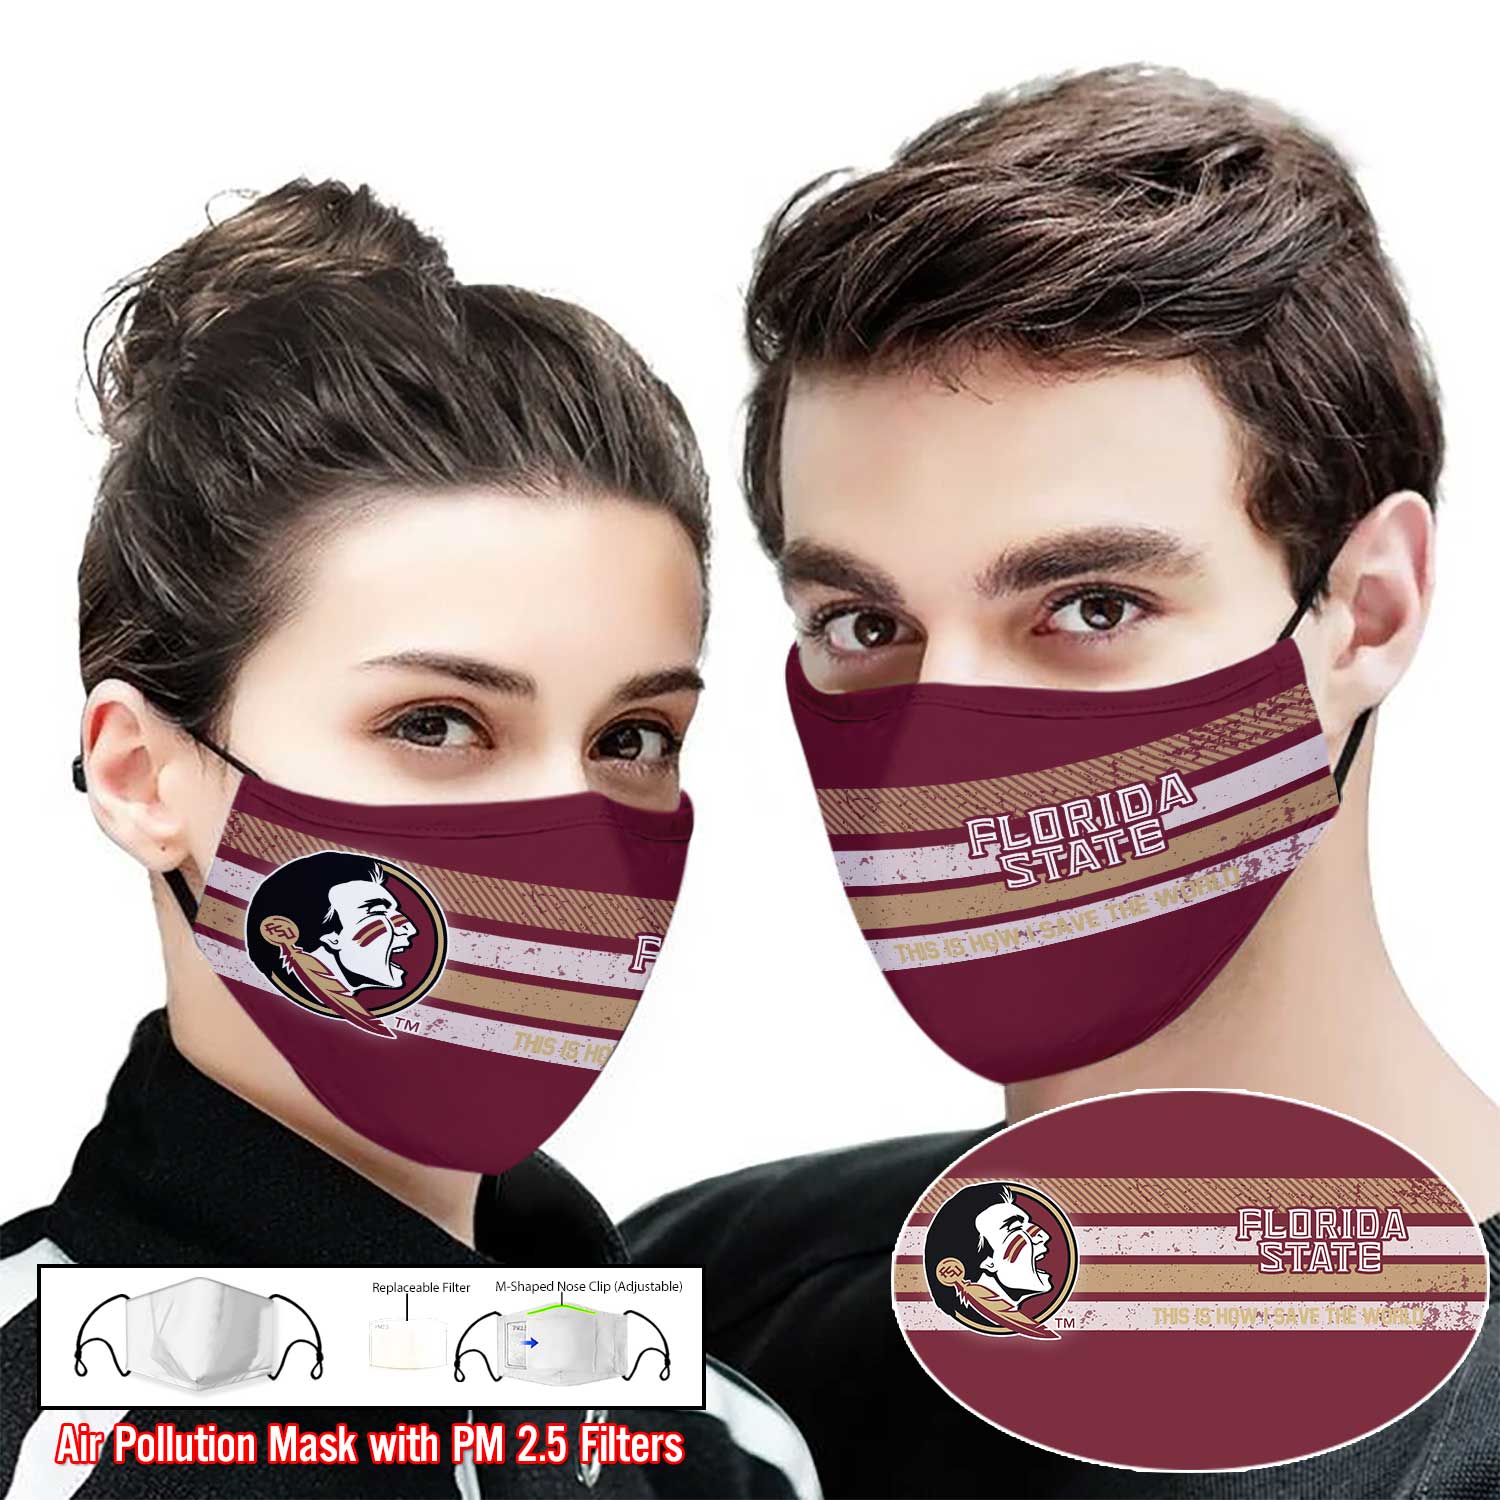 Florida state seminoles this is how i save the world face mask